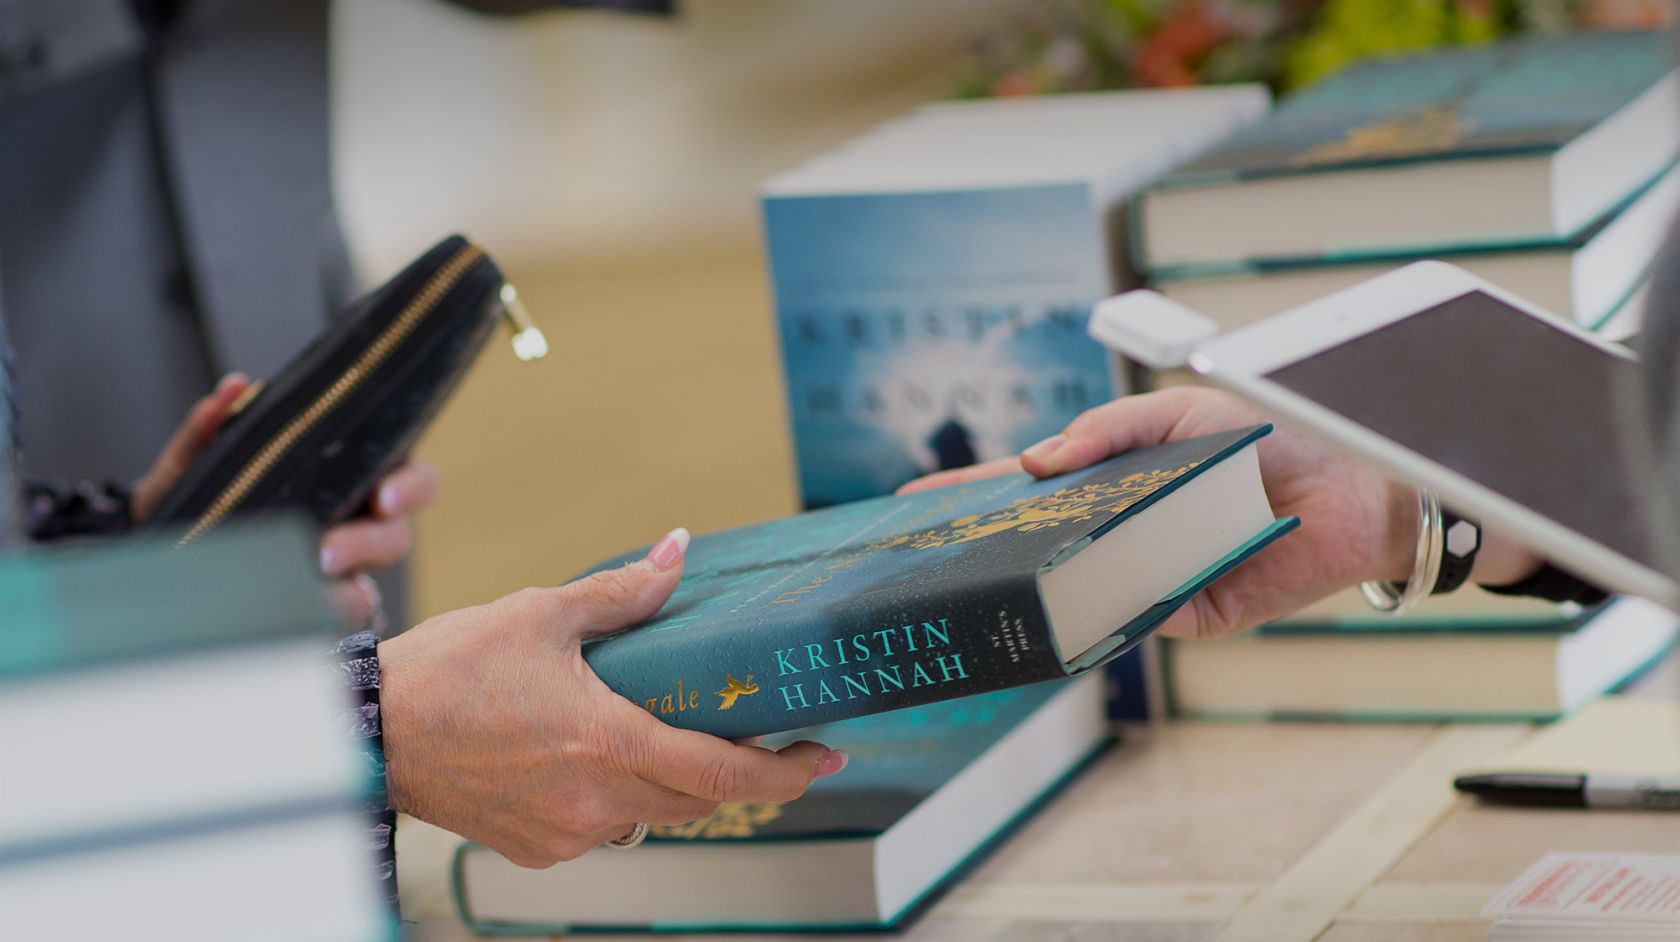 Kristin Hannah signing copies of her book at the Author Series event